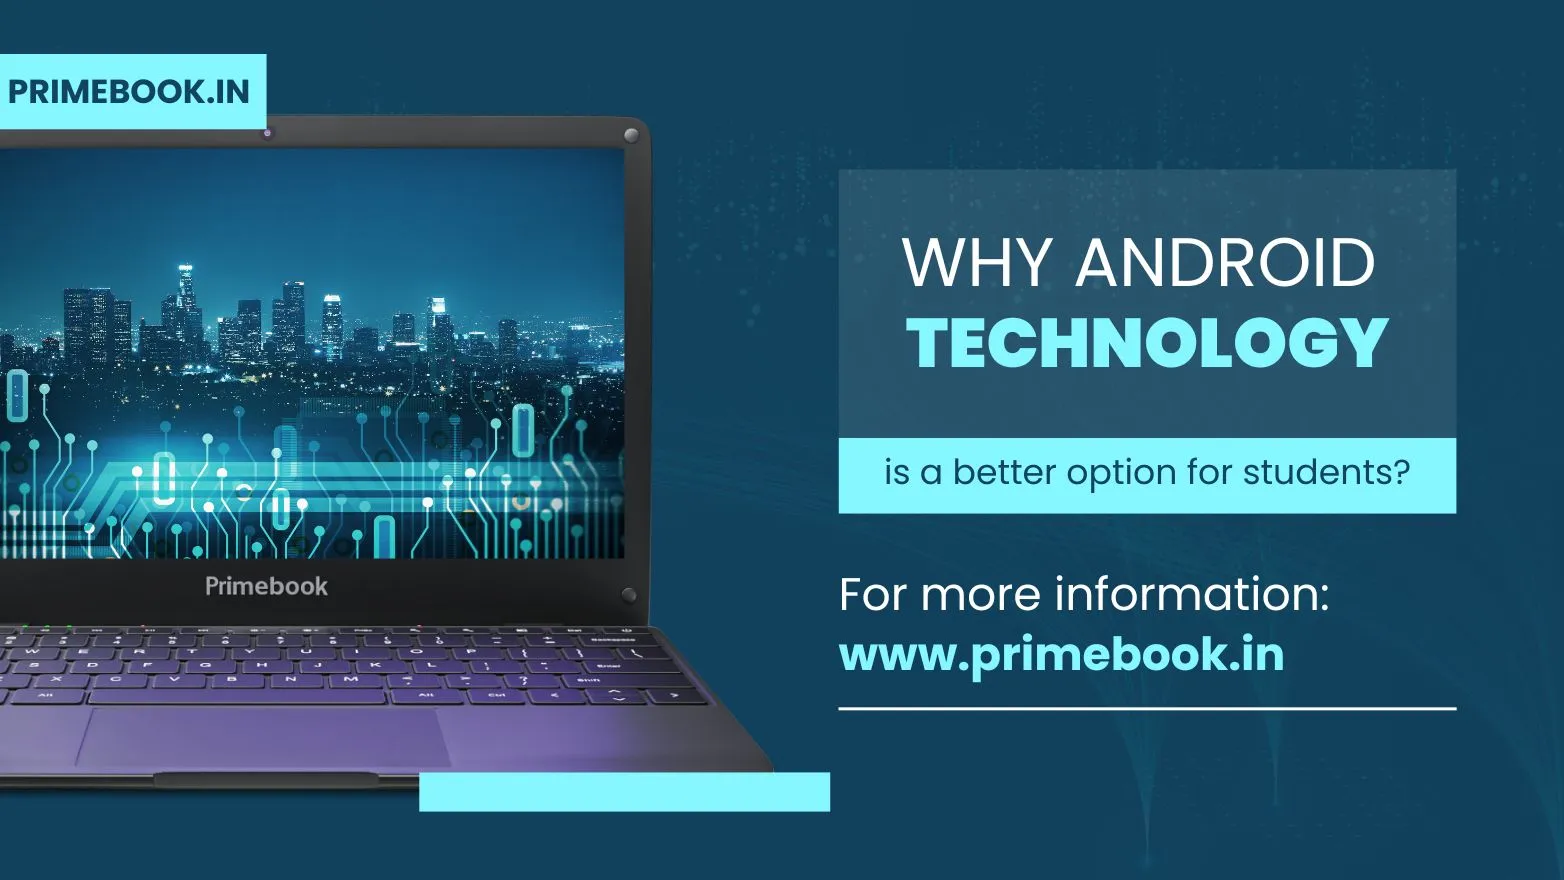 Why Android laptop is a better option for students?